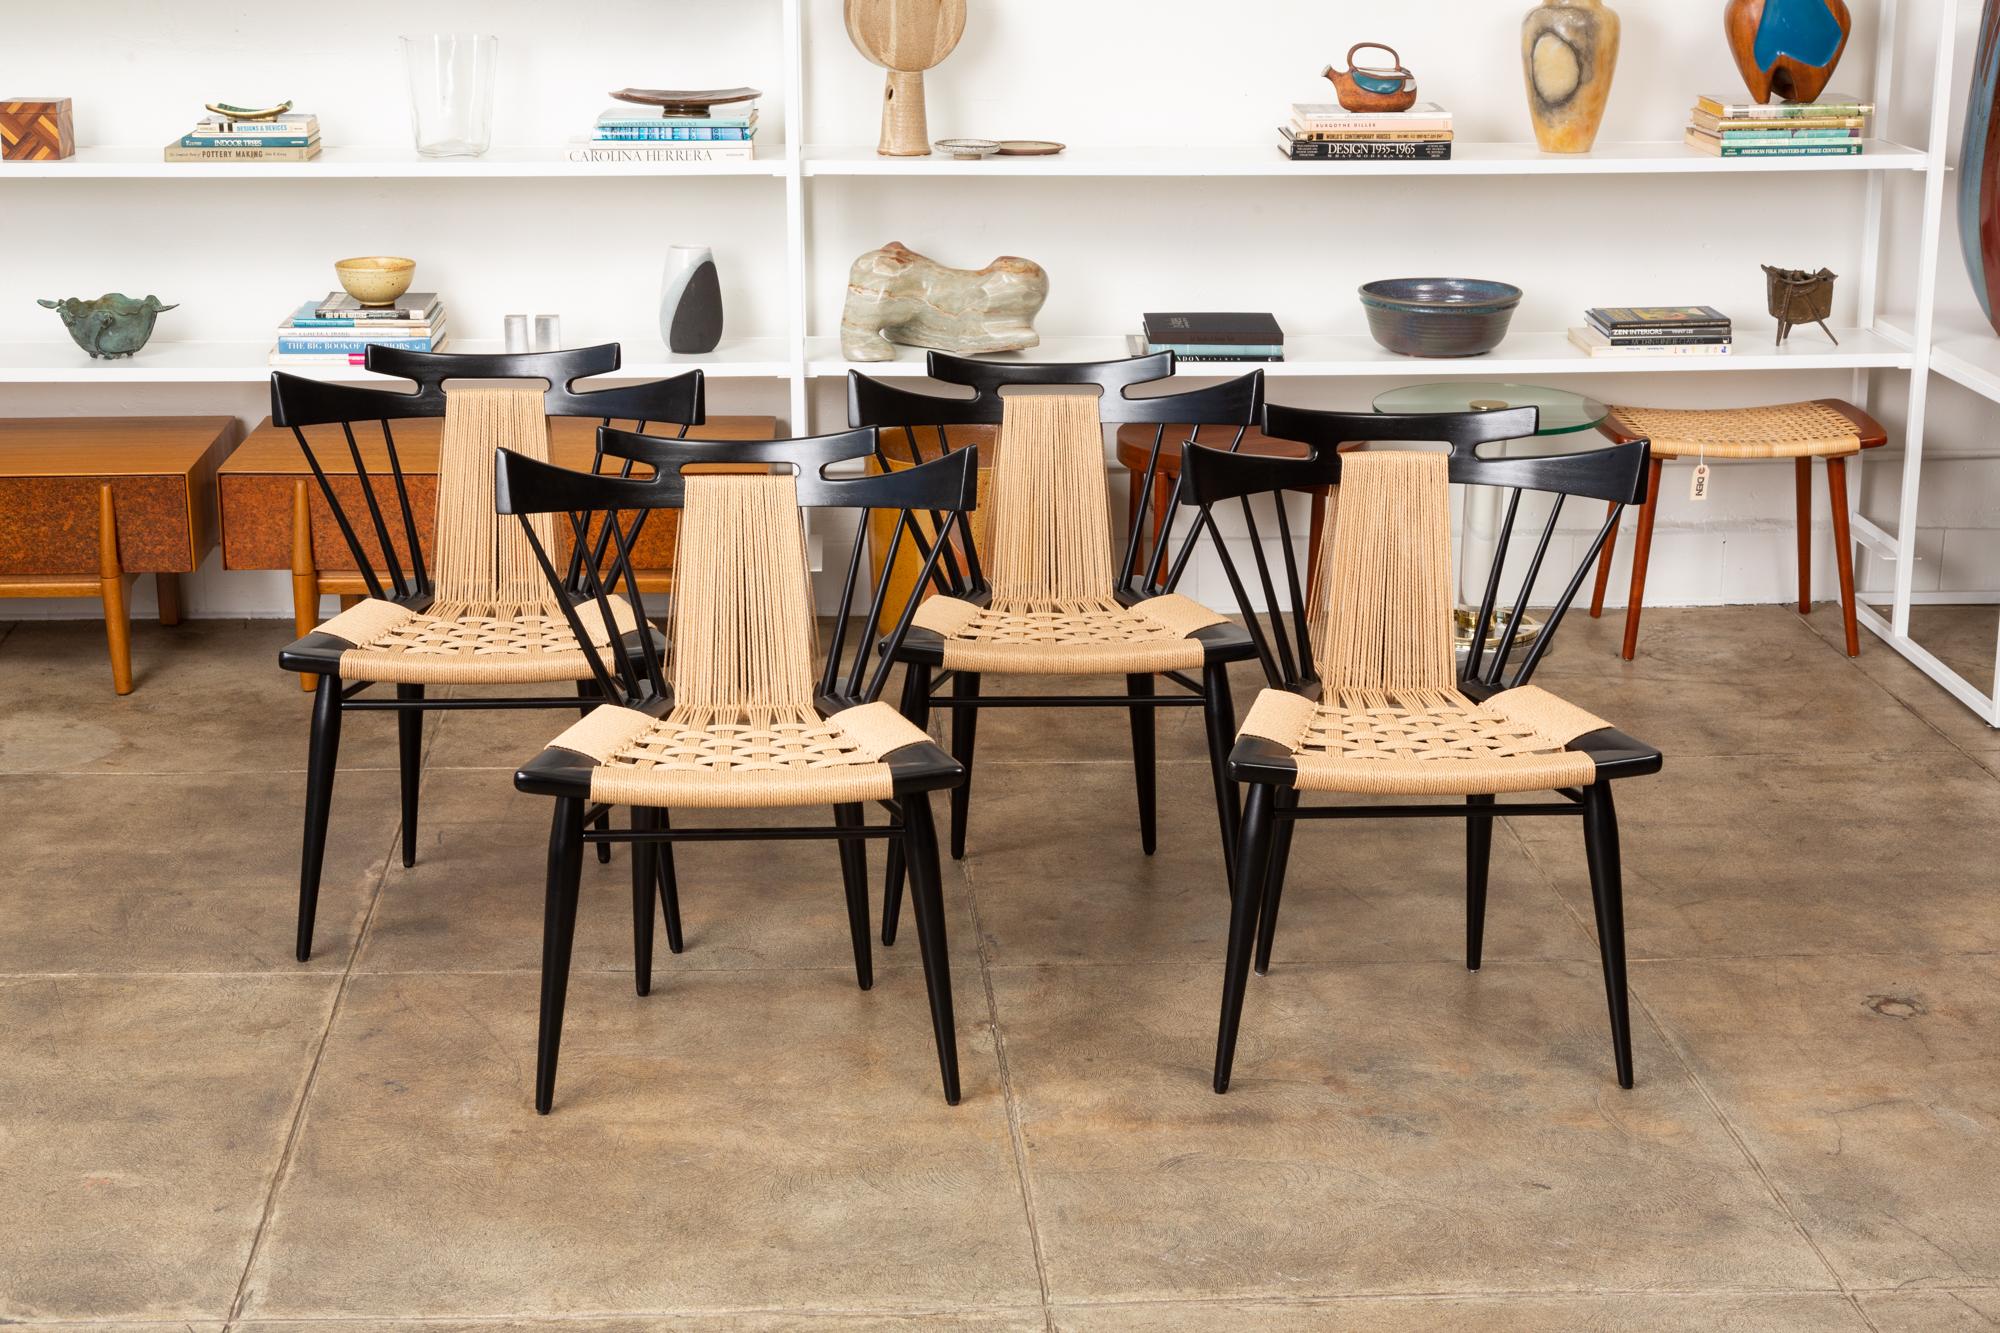 Mexican Set of 4 Edmond Spence “Yucatan” Chairs